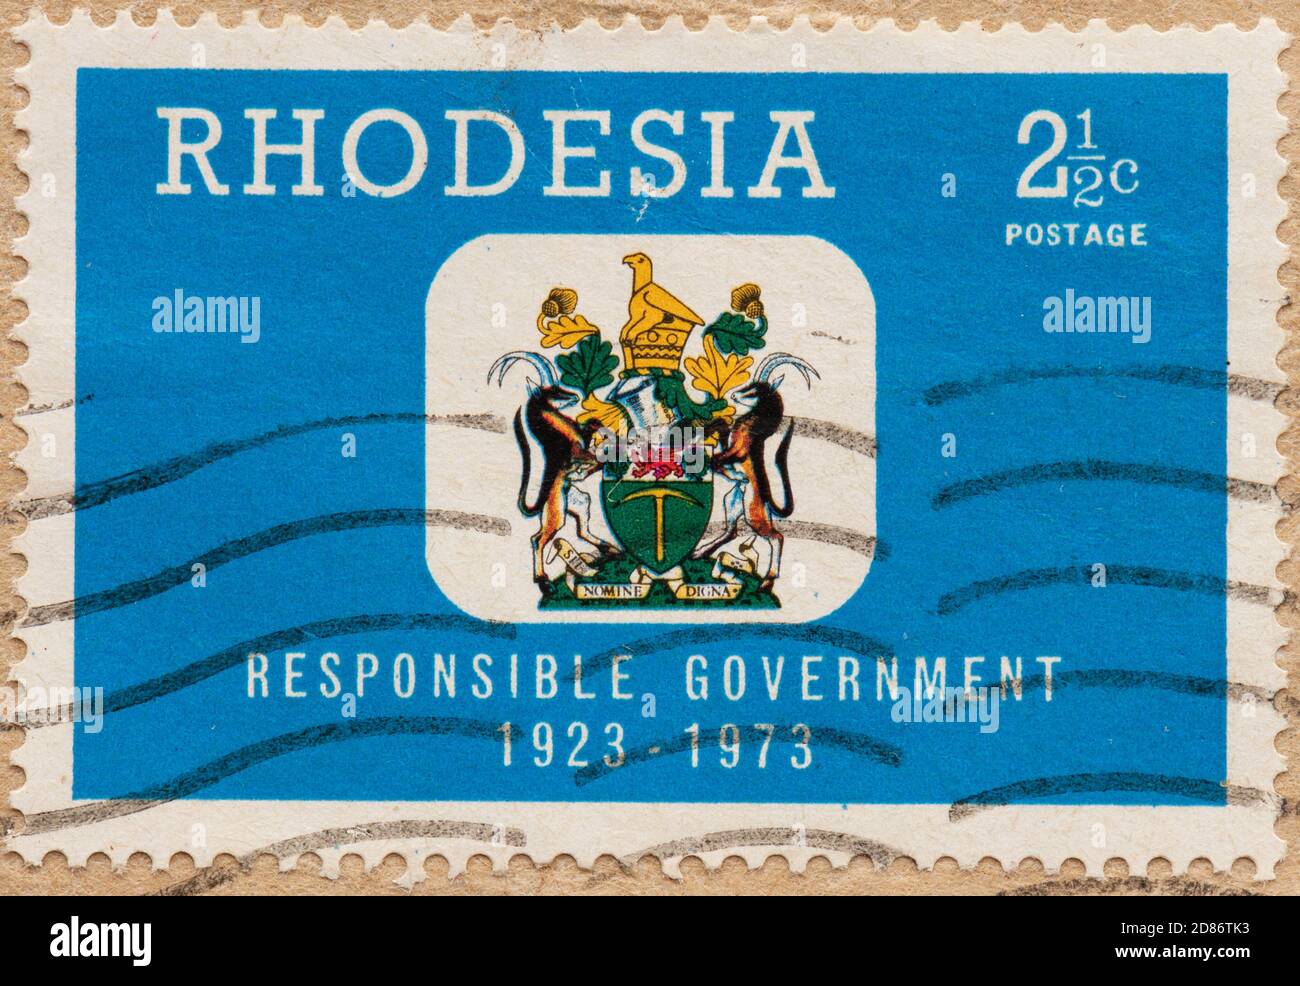 Rhodesia responsible government 1923 - 1973 stamp Stock Photo